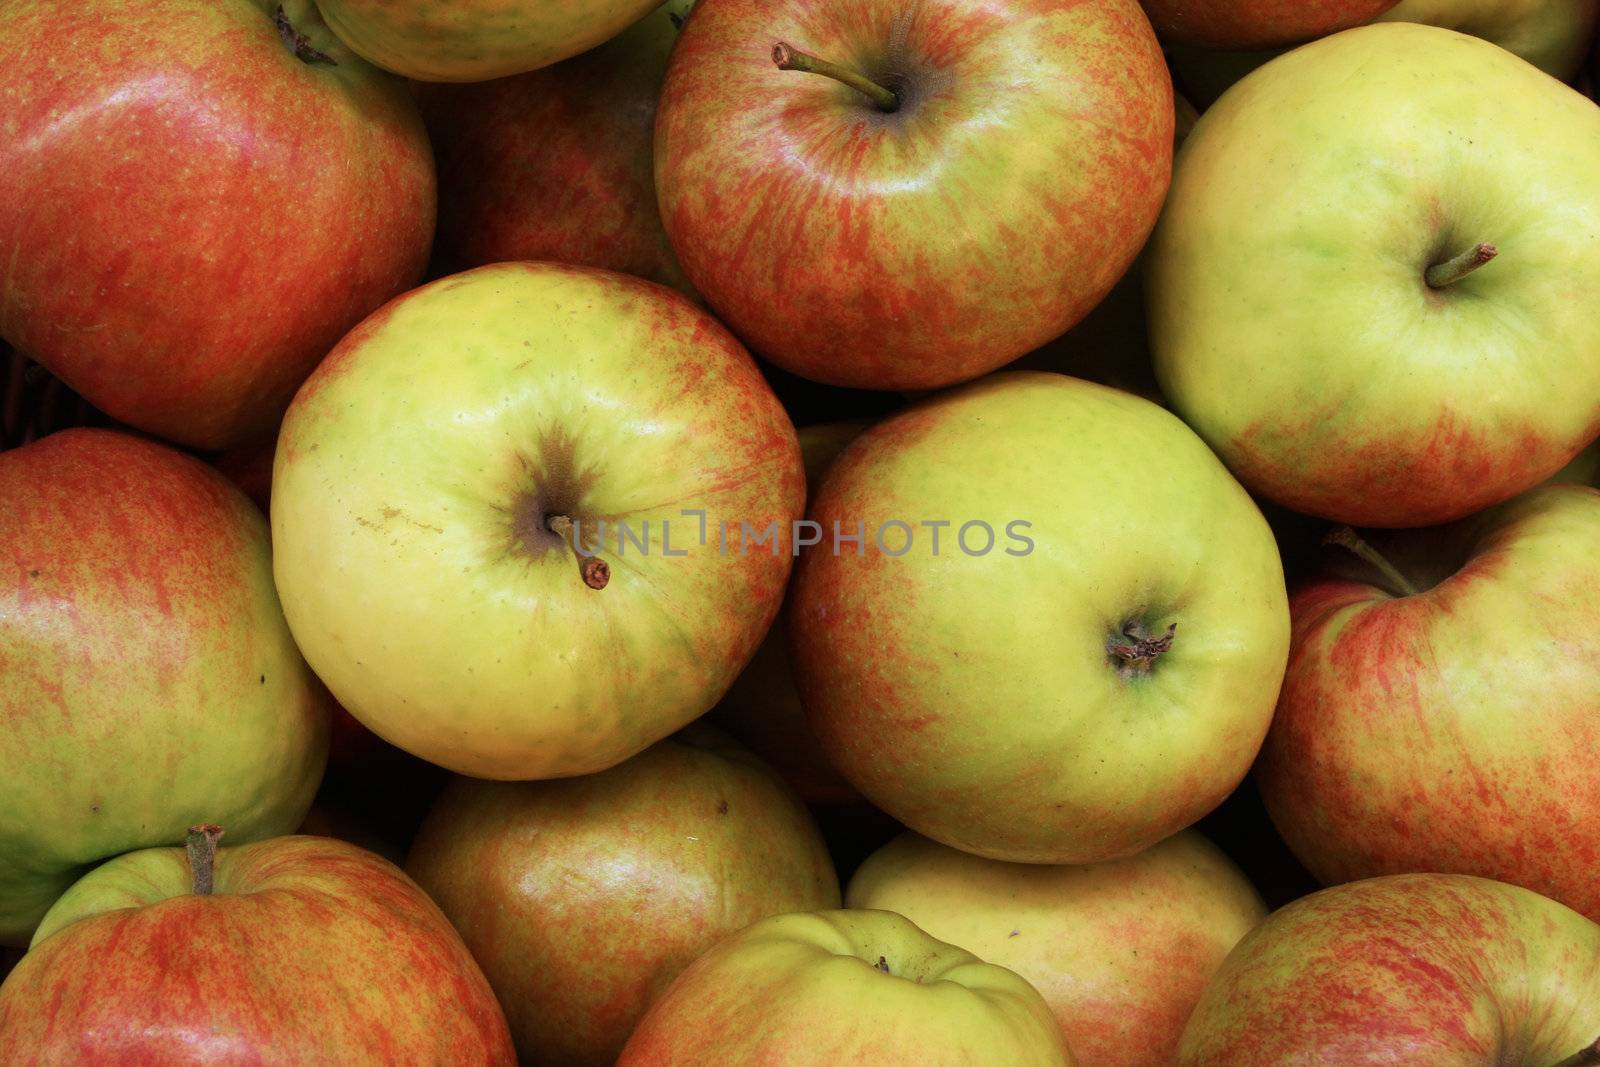 A pile of sweet apples at a farmers market